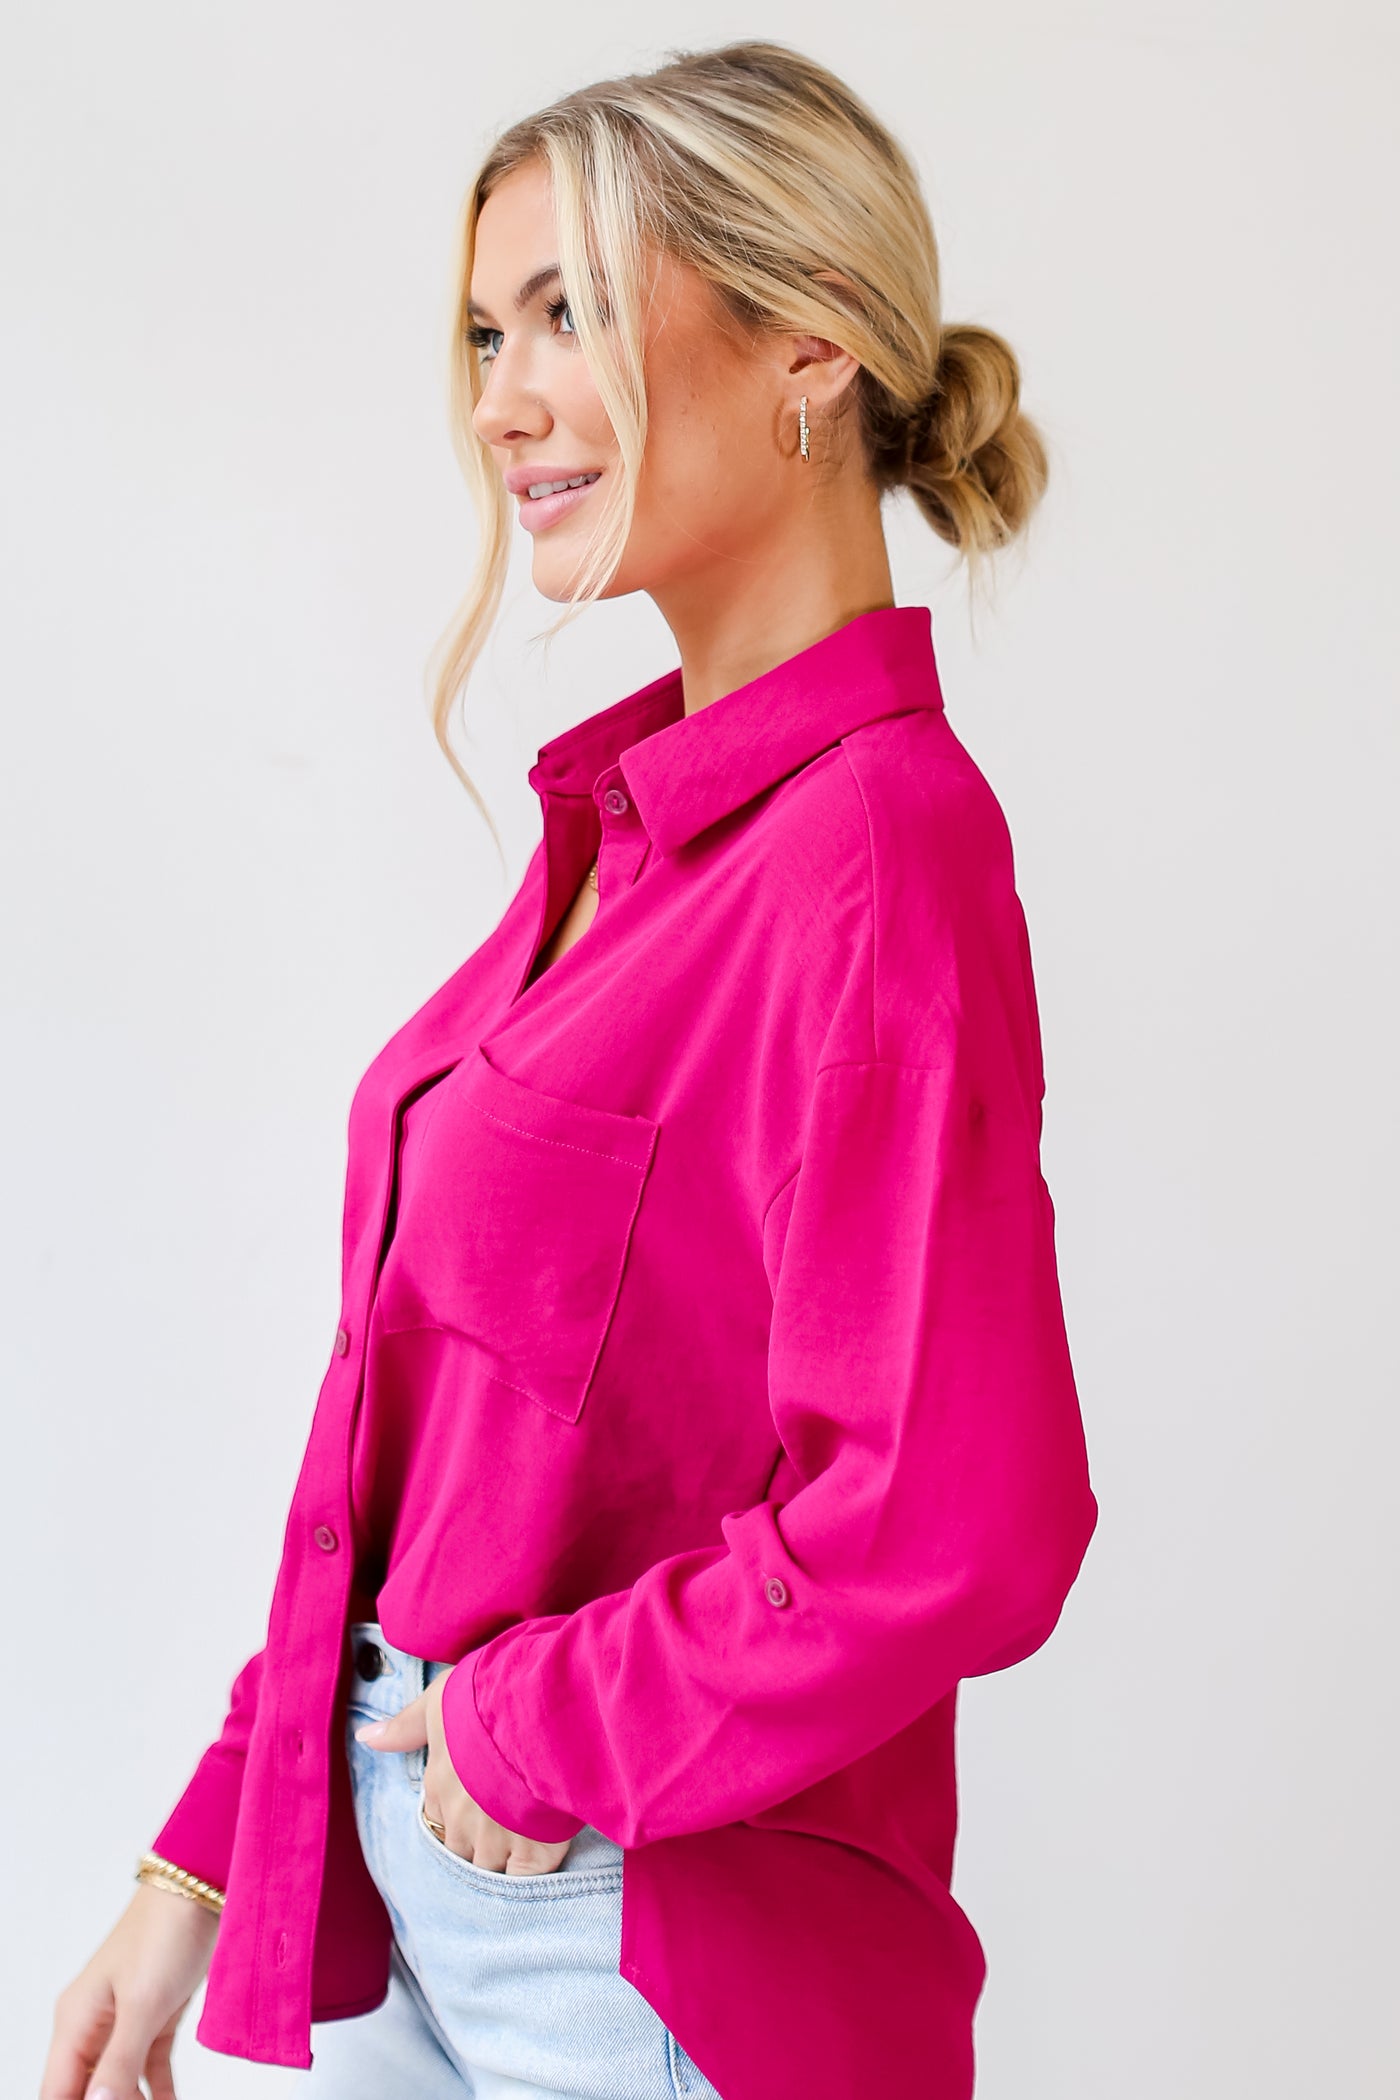 pink Button-Up Blouse side view